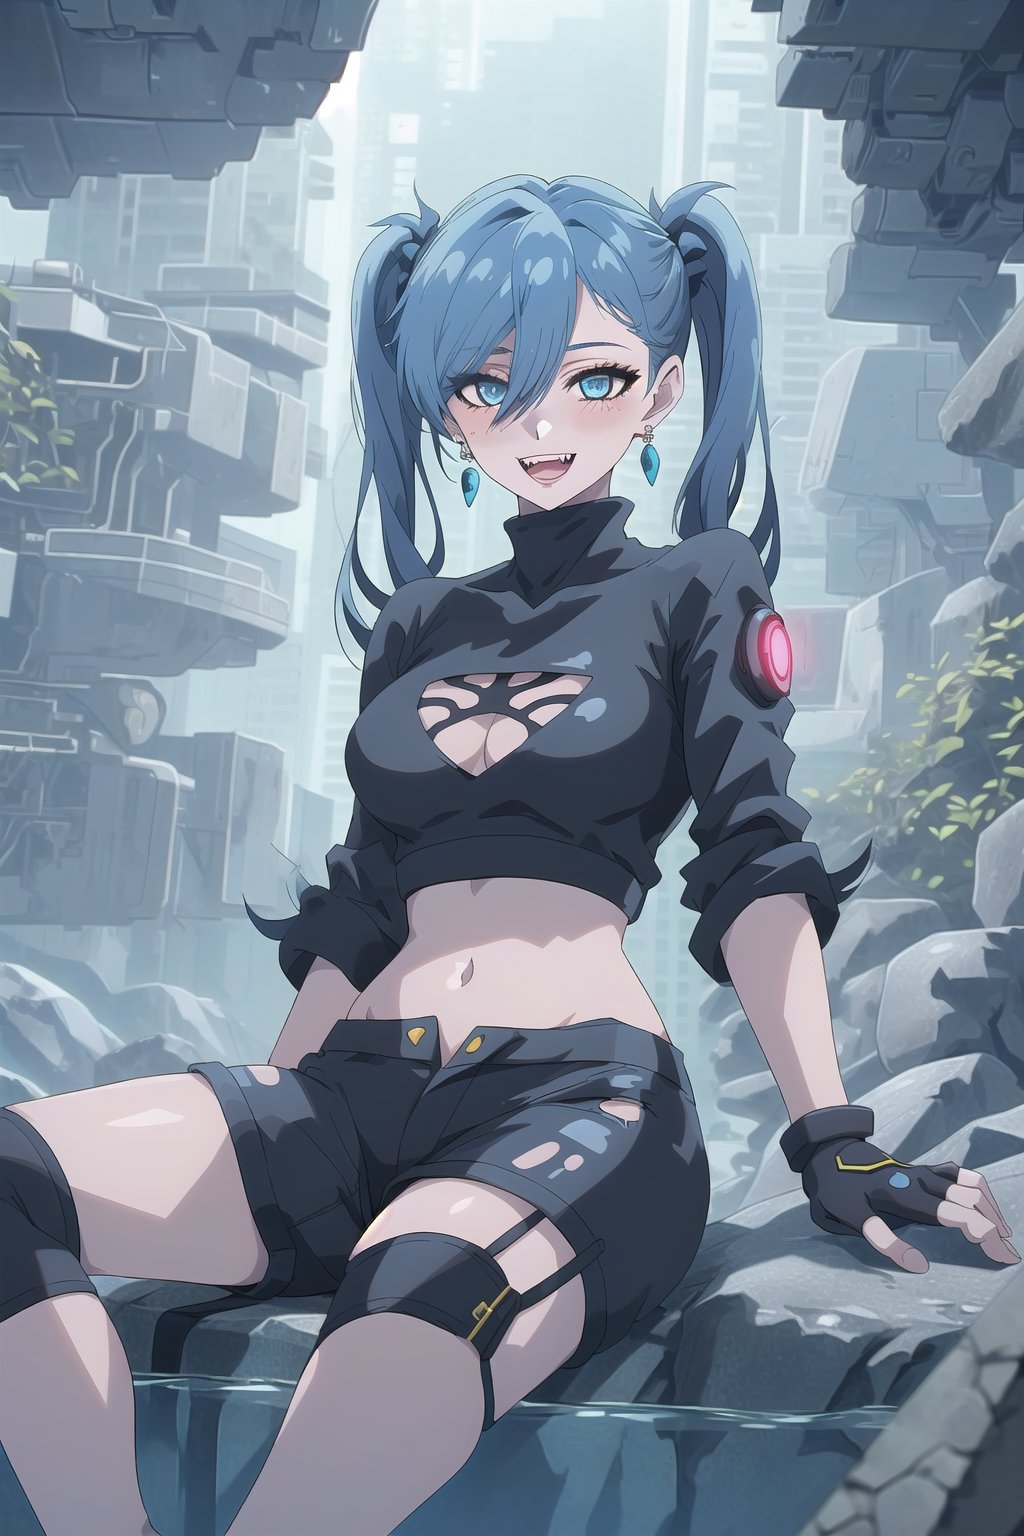 nier anime style illustration, best quality, masterpiece High resolution, good detail, bright colors, HDR, 4K. Dolby vision high. 

Girl with long straight black hair, long twin pigtails (hair covering one eye), blue eyes, blushing, blue earrings 

Stylish Cyberpunk Black Crop Top 

Showing navel, exposed navel 

Elegant cyberpunk black shorts

Barefoot

Inside an underground cave 

Blue illumination in the depth of underground water 

Sitting on a rock 

Black Stylish Fingerless Cyberpunk Gloves

Blue natural lighting

Flirty smile (yandere smile). Happy, excited. Open mouth 

Showing fangs, exposed fangs